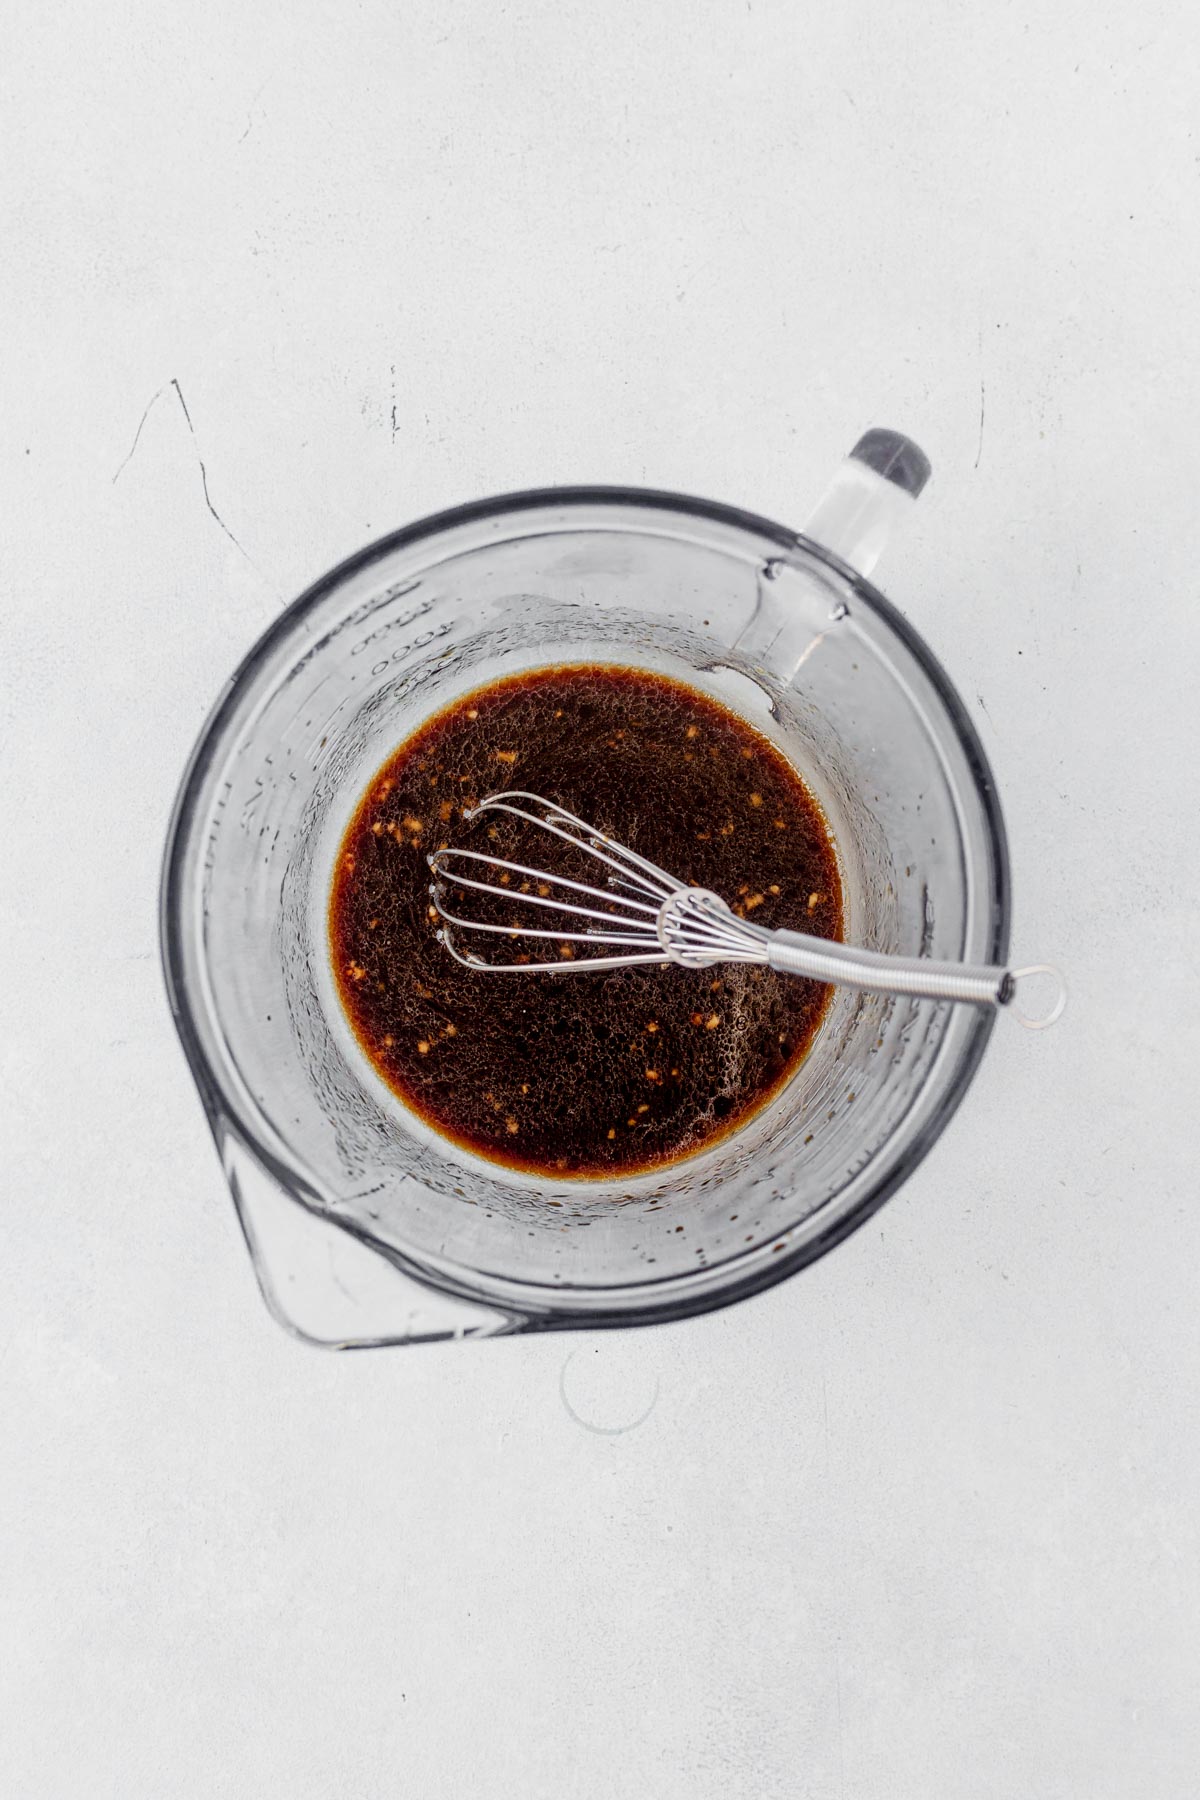 teriyaki sauce in a measuring bowl with a whisk